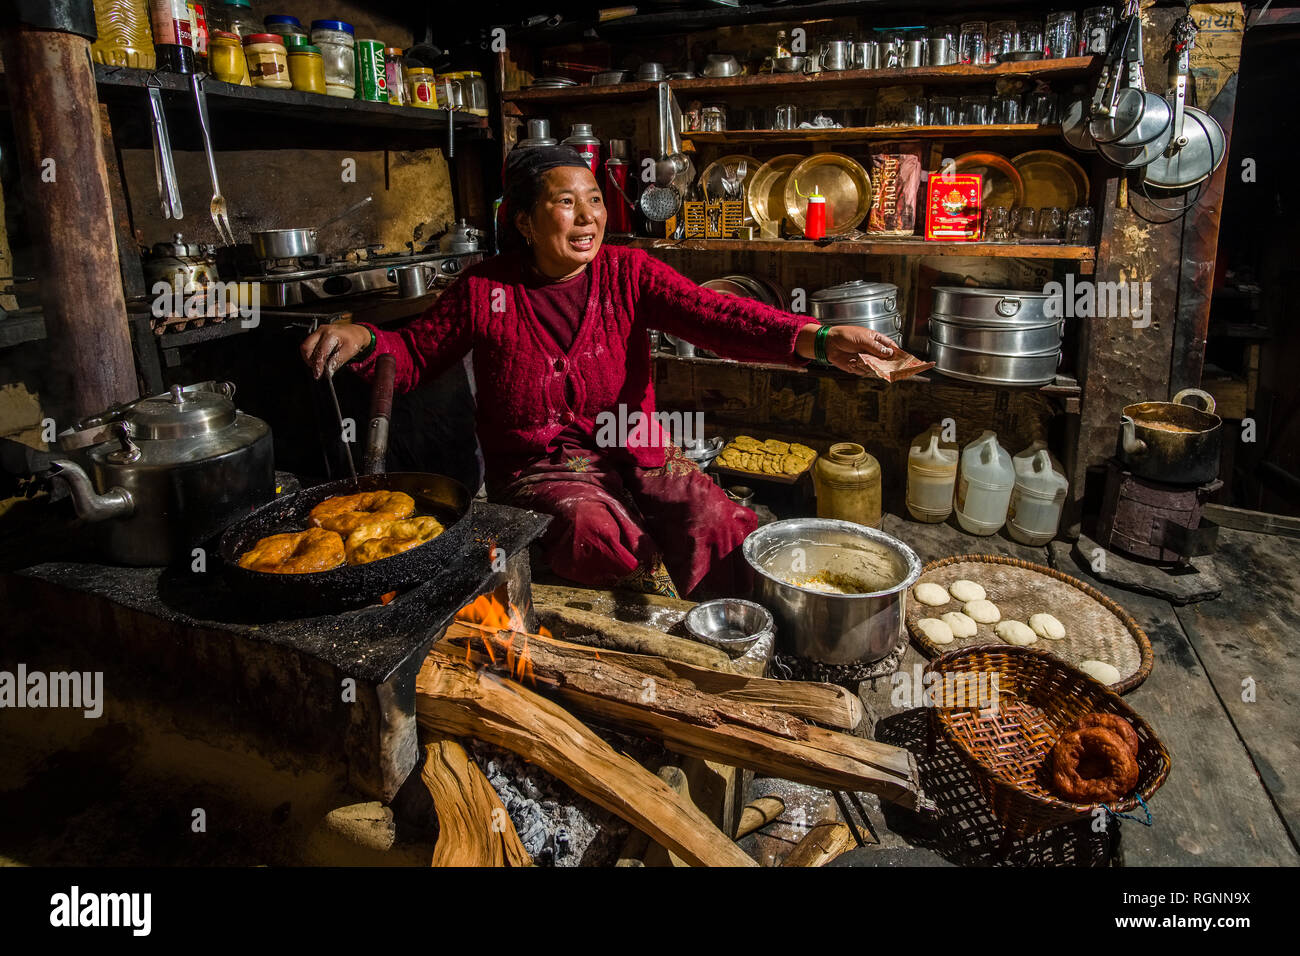 A local woman working in a traditional kitchen, preparing Doughnuts Stock Photo